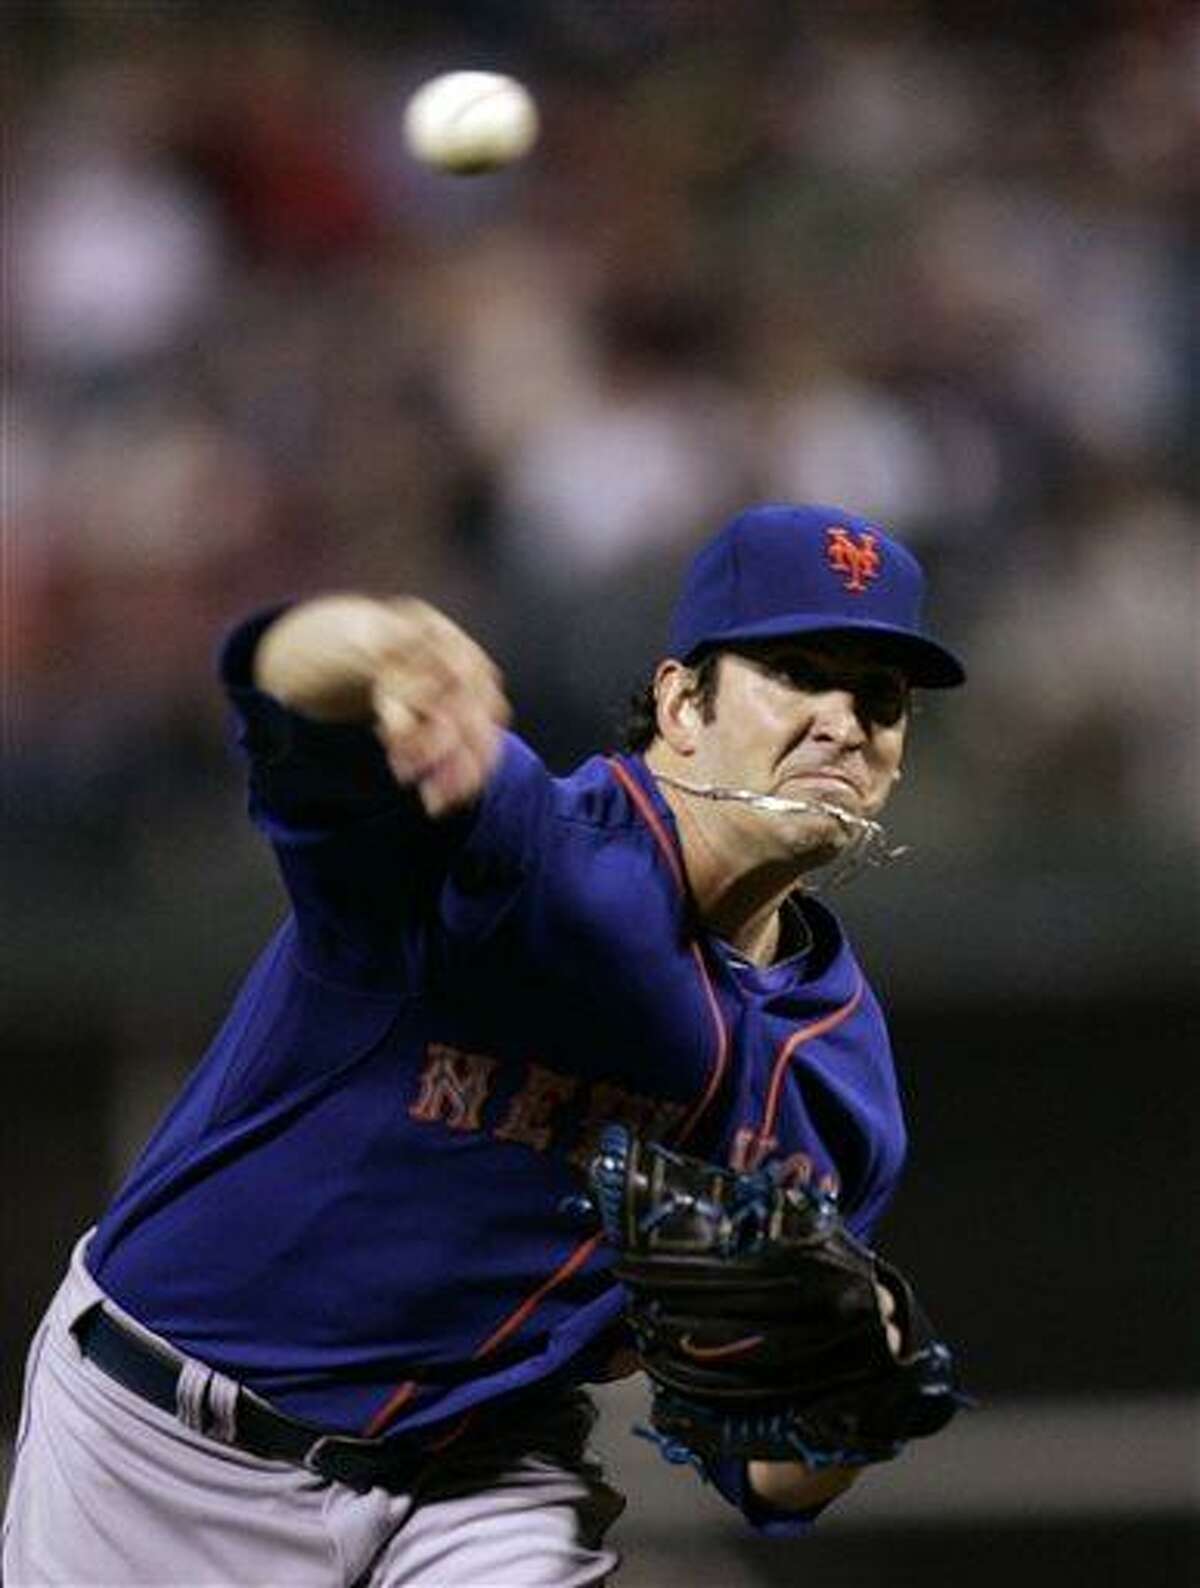 New York Mets' Matt Harvey throws his 100th pitch during the seventh inning of a baseball game with the Philadelphia Phillies, Monday, April 8, 2013, in Philadelphia. The Mets won 7-2. (AP Photo/Tom Mihalek)